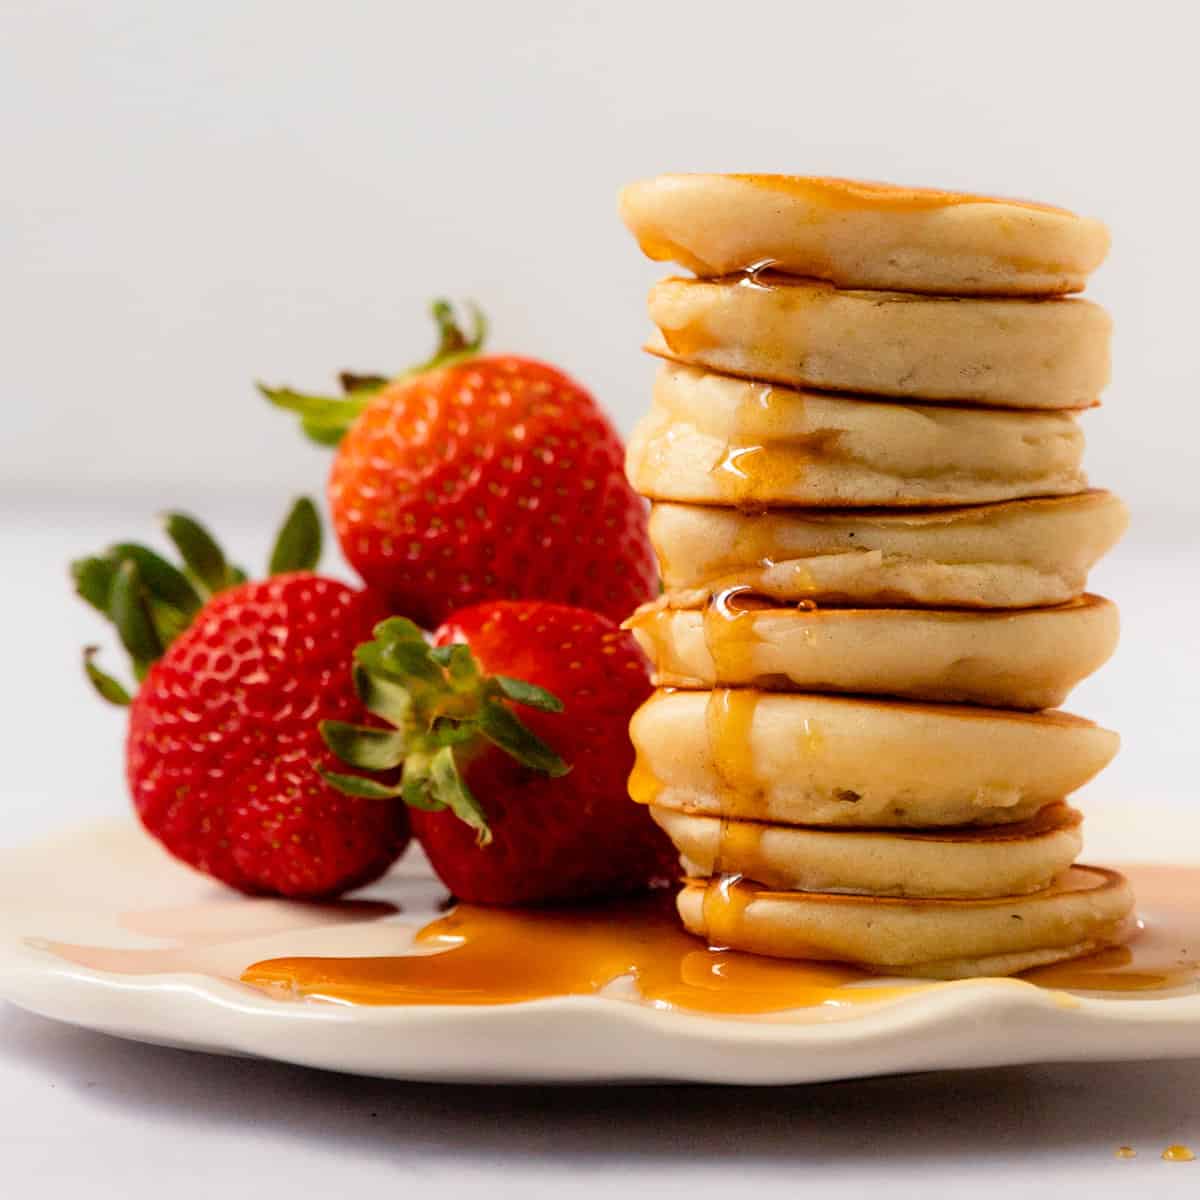 These mini pancakes are light and fluffy silver dollar pancakes. They're fun, kid friendly, quick, easy to make and perfect for breakfast.